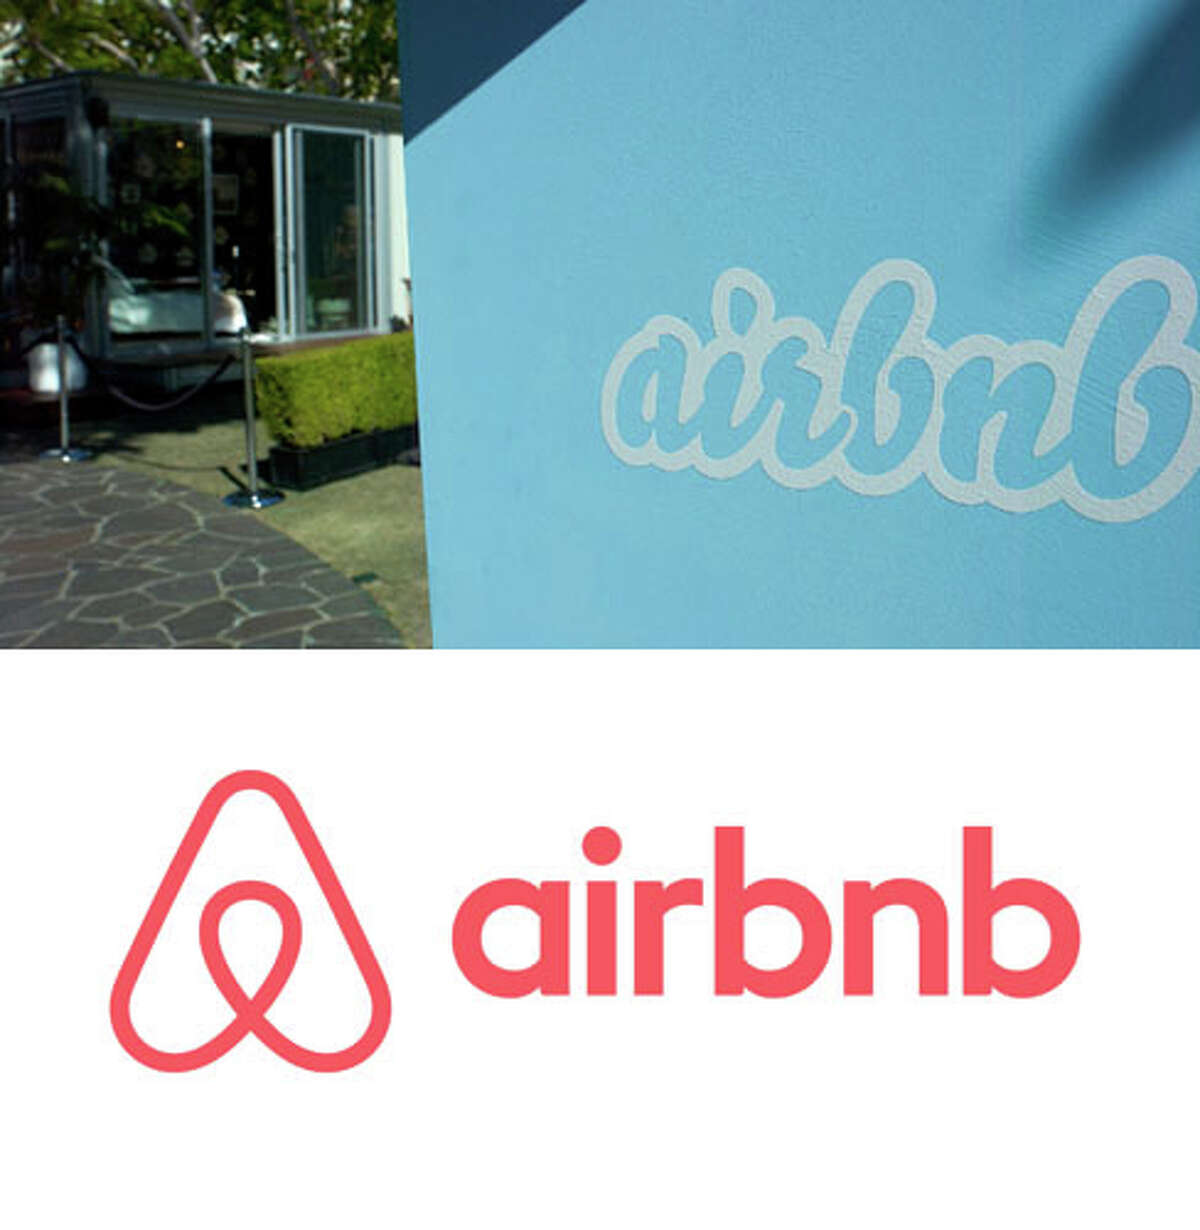 Airbnb received backlash after changing its logo in July 2014, with one Guardian headline asking "Is it balls, vagina, or both? Airbnb logo sparks wave of internet parodies." Airbnb calls its logo the "Belo." "Belonging has always been a fundamental driver of humankind. So to represent that feeling, we’ve created a symbol for us as a community," the company wrote. "It’s an iconic mark for our windows, our doors, and our shared values."